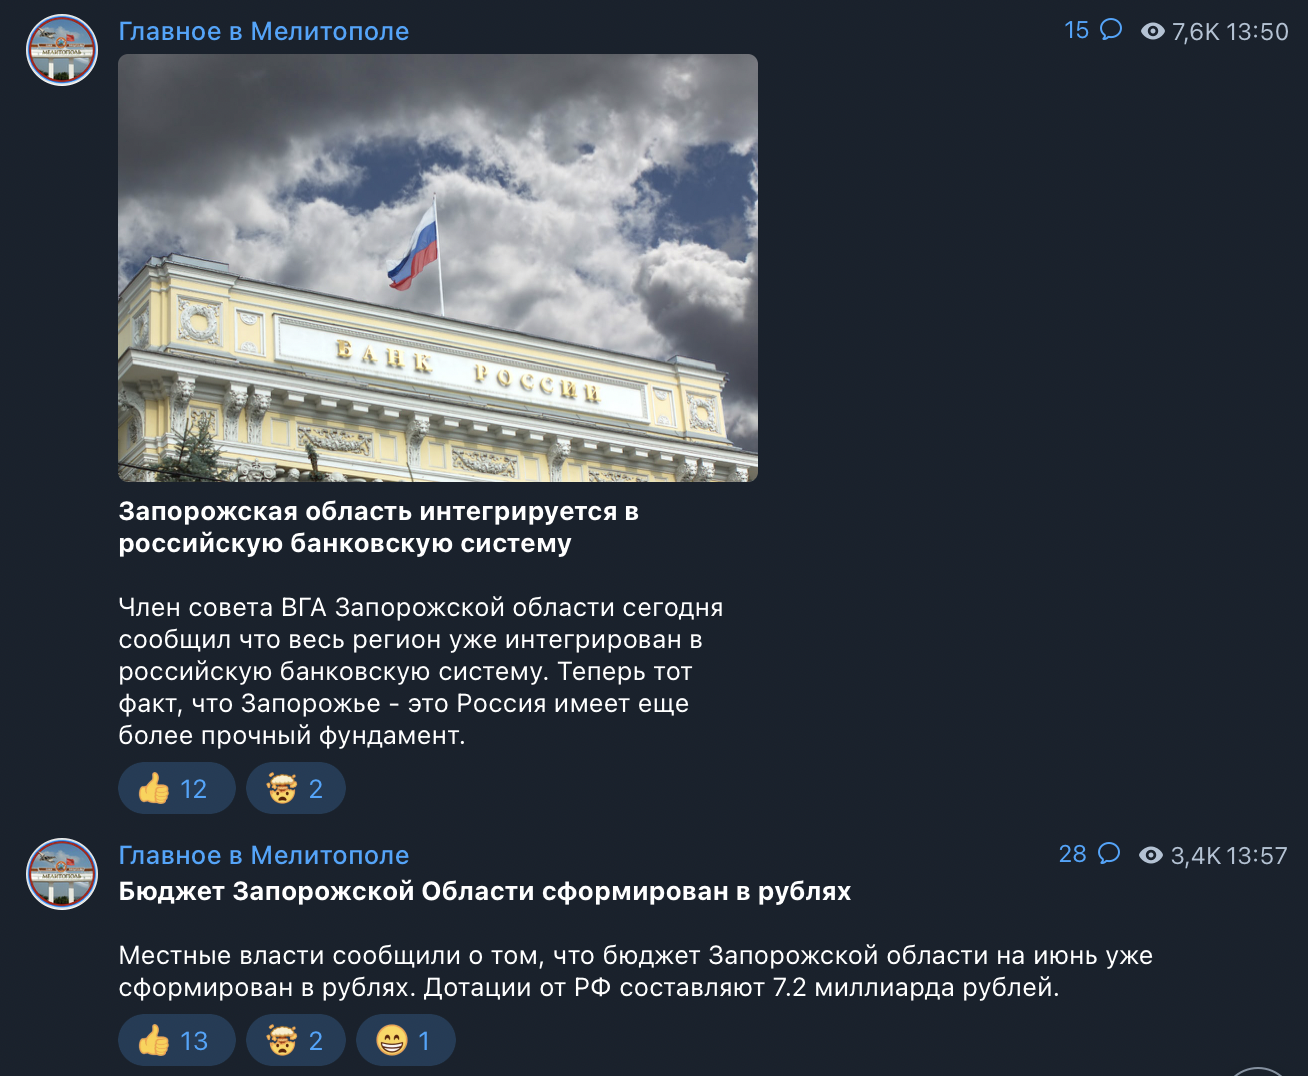 Image caption: ‘Regional budget in Zaporozhye is formed in roubles’, ‘Zaporozhye region is being integrated into Russian banking system’ Some of the headlines hitting Russian propaganda channels on Telegram